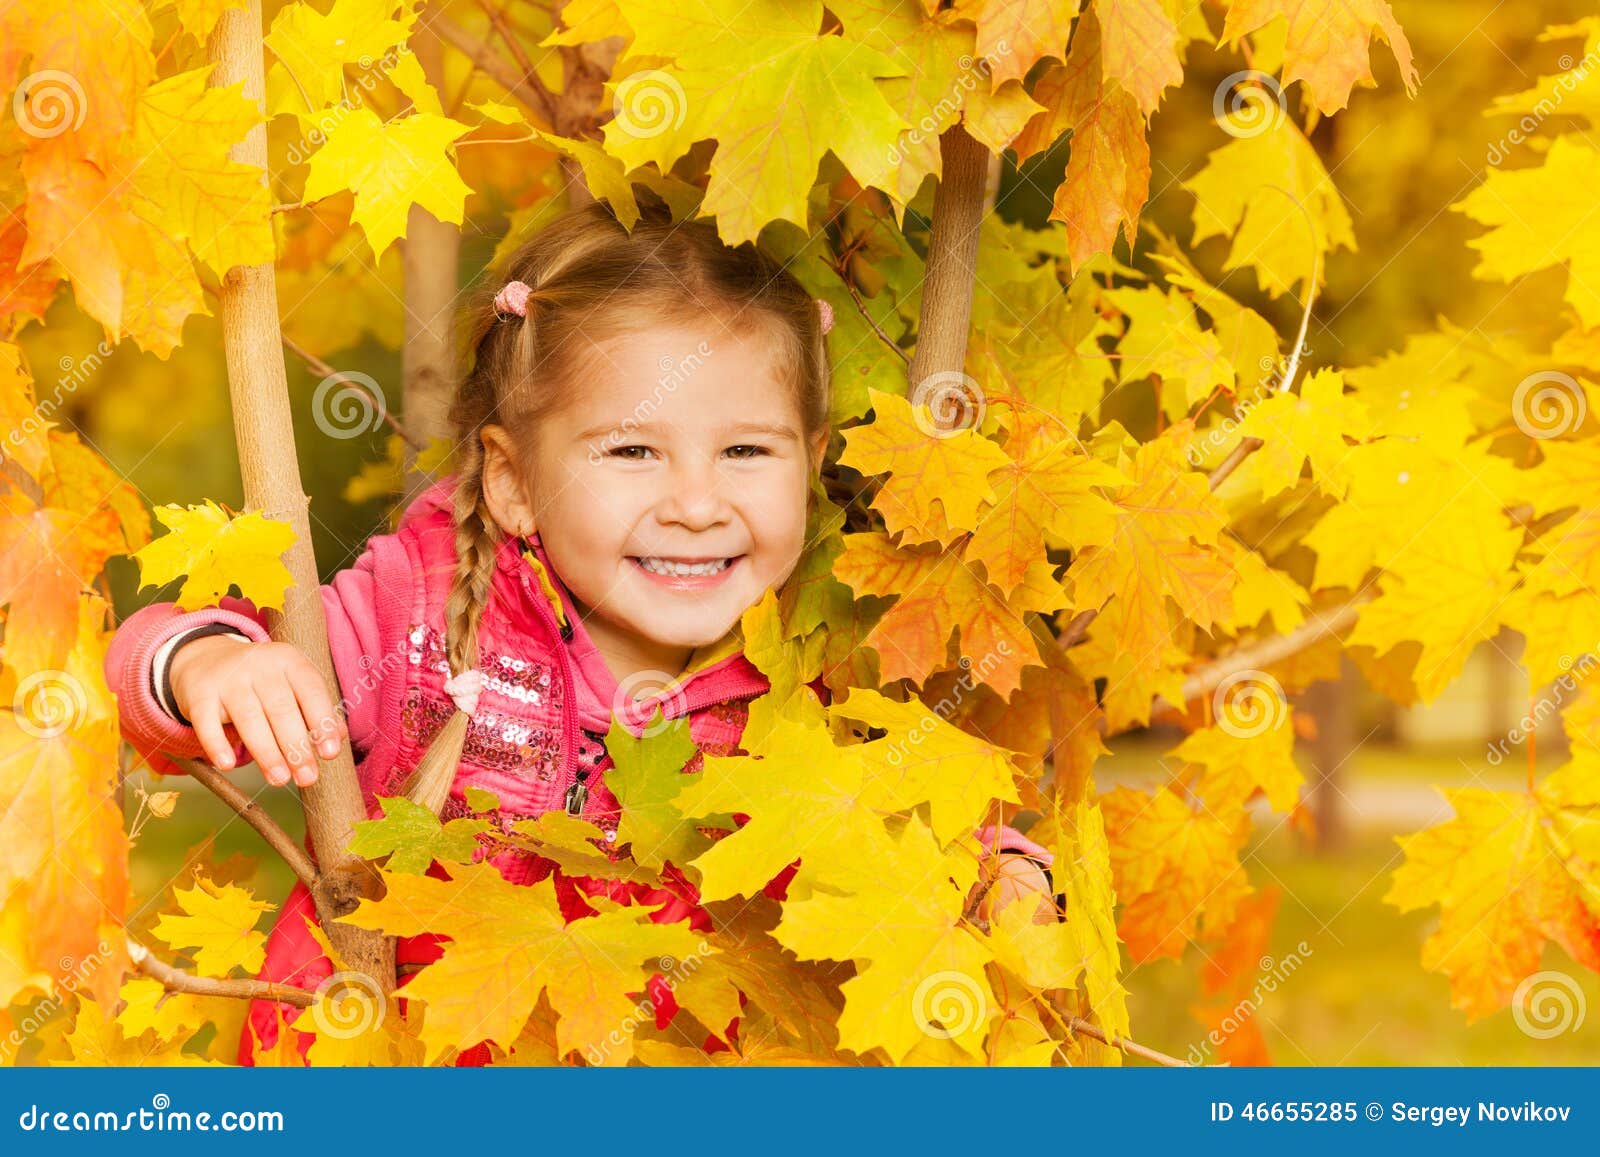 Happy Girl Hides in Autumn Maple Leaves during Day Stock Image - Image ...